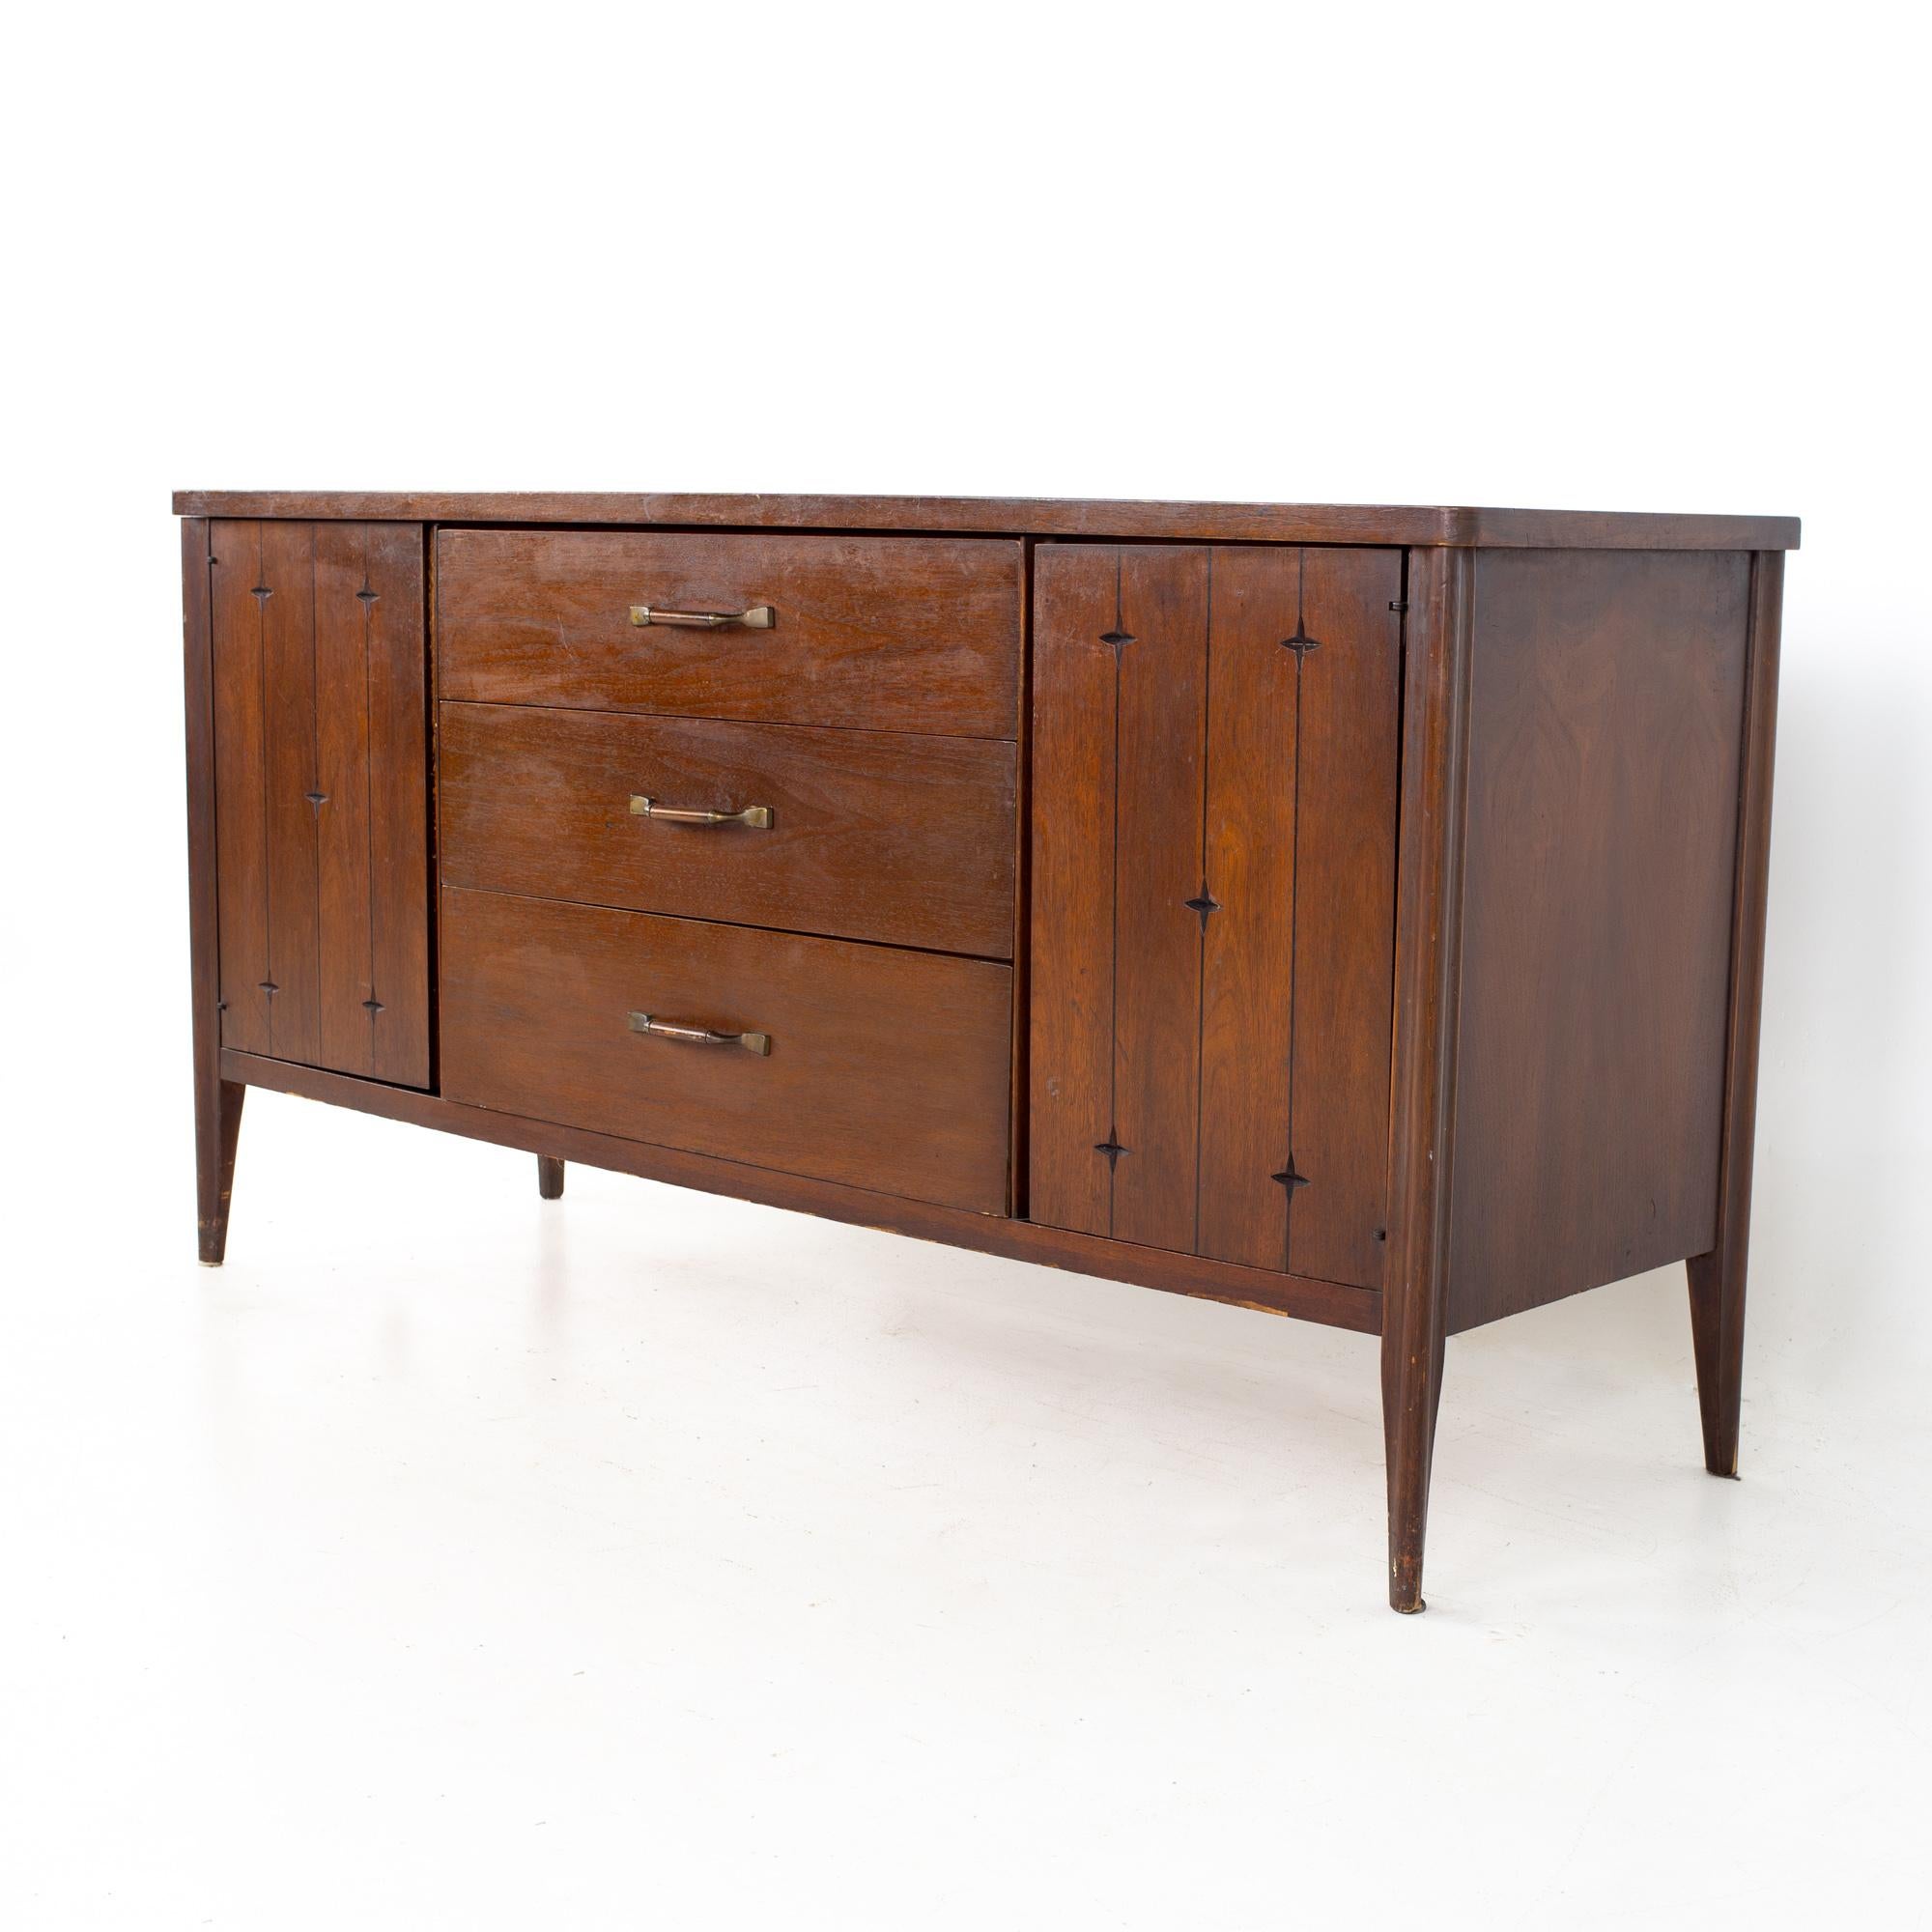 Broyhill Saga mid century walnut sideboard buffet credenza
Credenza measures: 60.75 wide x 19.25 deep x 31 inches high

All pieces of furniture can be had in what we call restored vintage condition. That means the piece is restored upon purchase